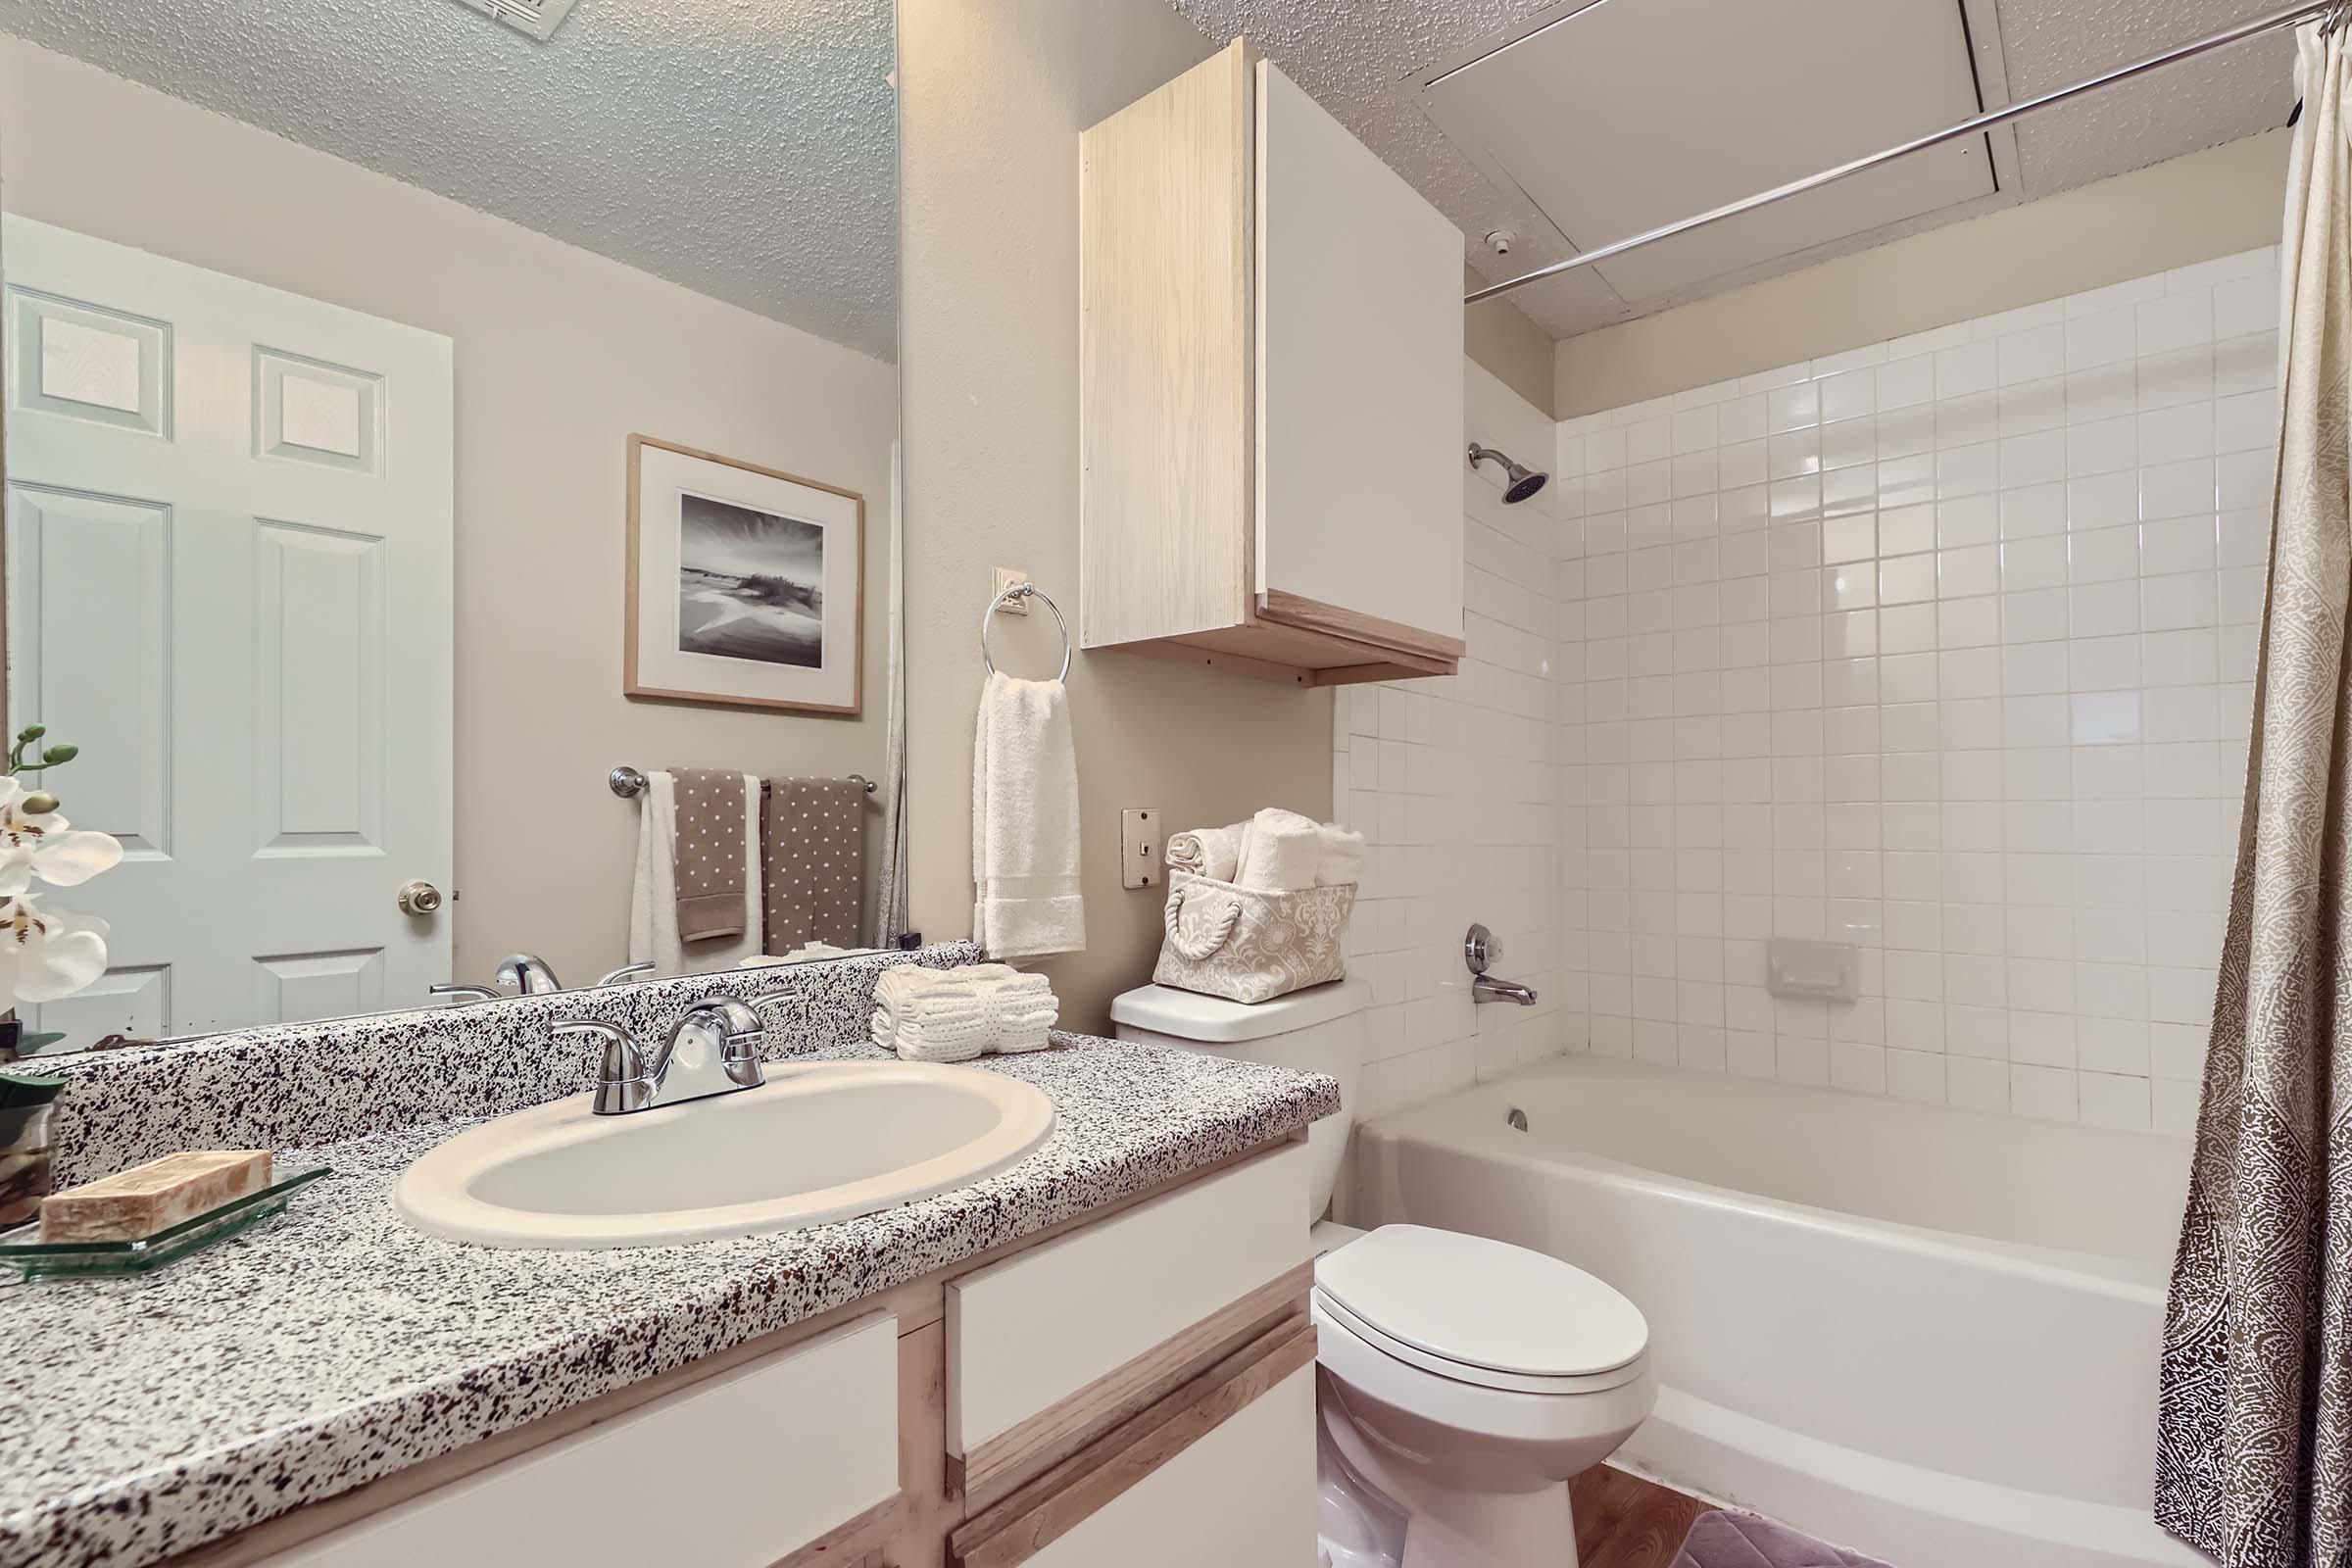 A model bathroom with a vanity, shower and accessories at Rise Skyline. 